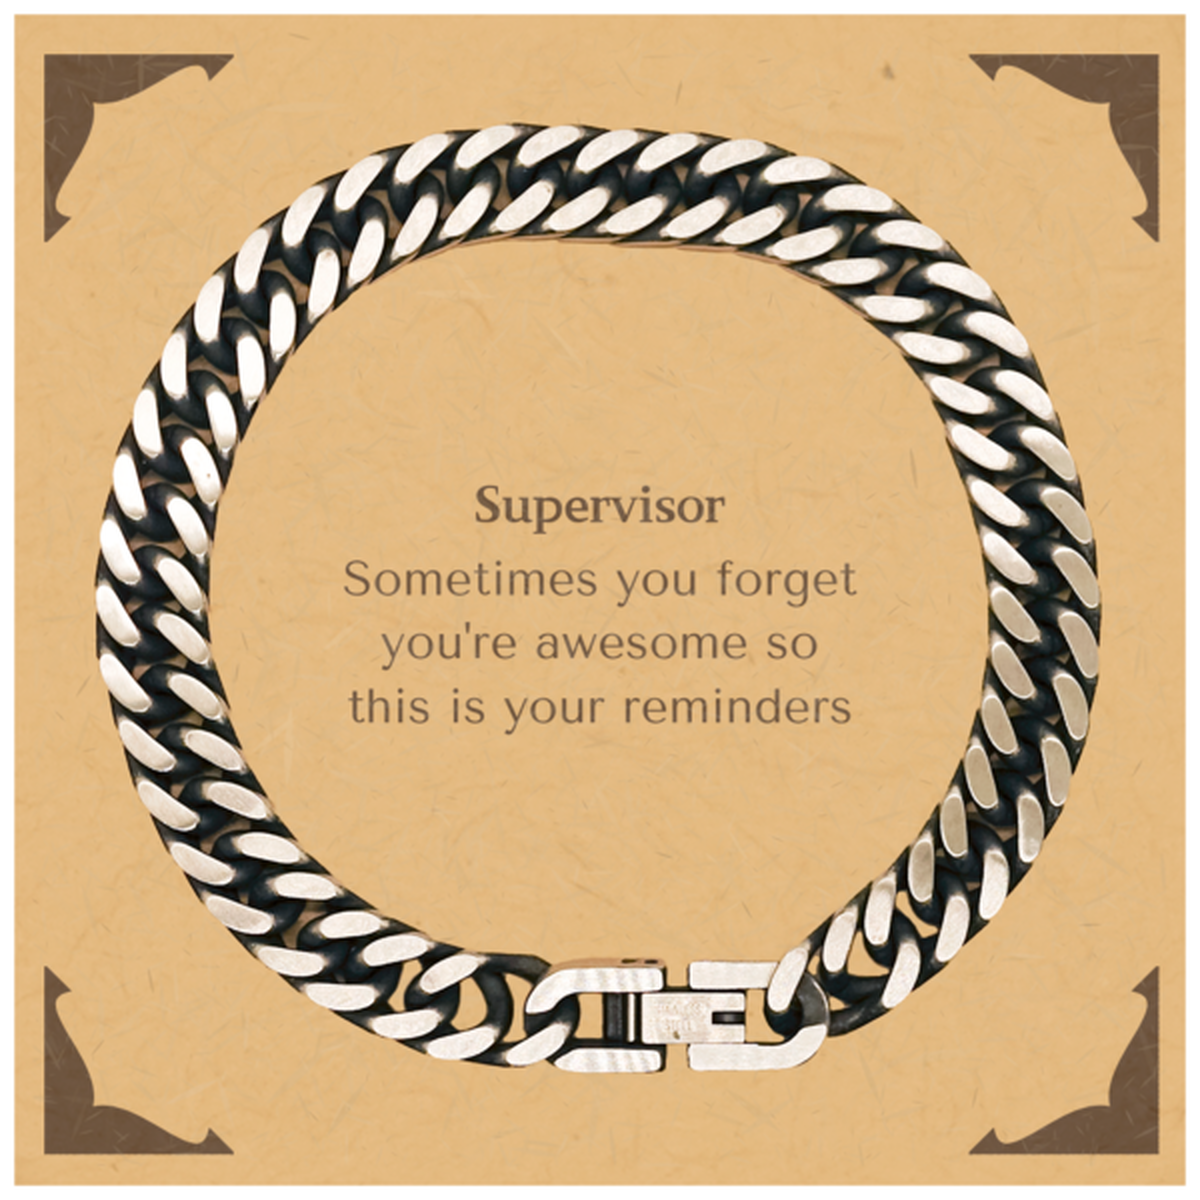 Sentimental Supervisor Cuban Link Chain Bracelet, Supervisor Sometimes you forget you're awesome so this is your reminders, Graduation Christmas Birthday Gifts for Supervisor, Men, Women, Coworkers